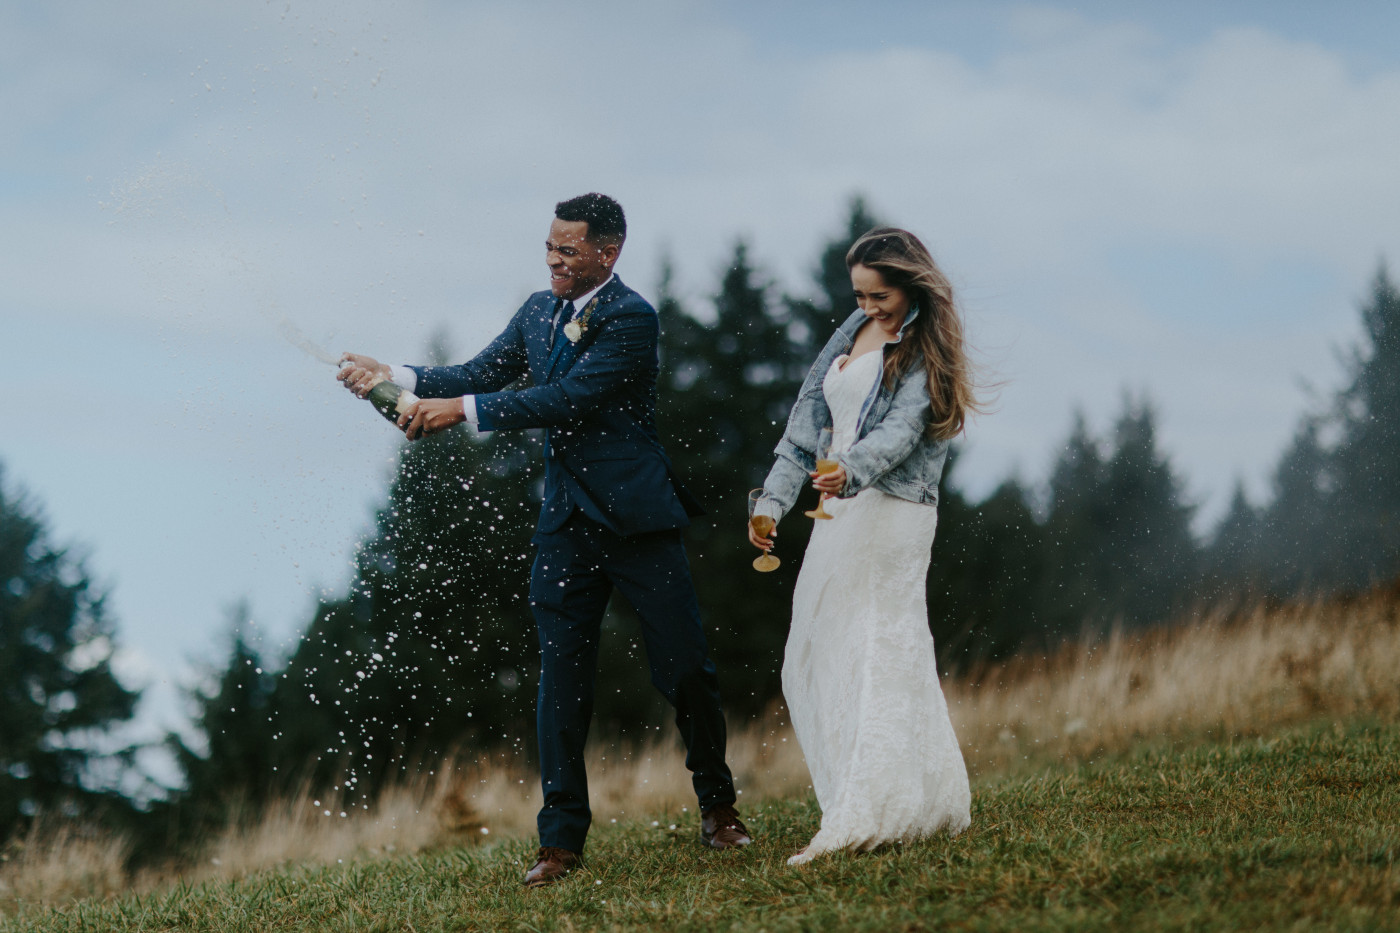 Deandre and Ariana get sprayed by the champagne. Elopement photography at Mount Hood by Sienna Plus Josh.